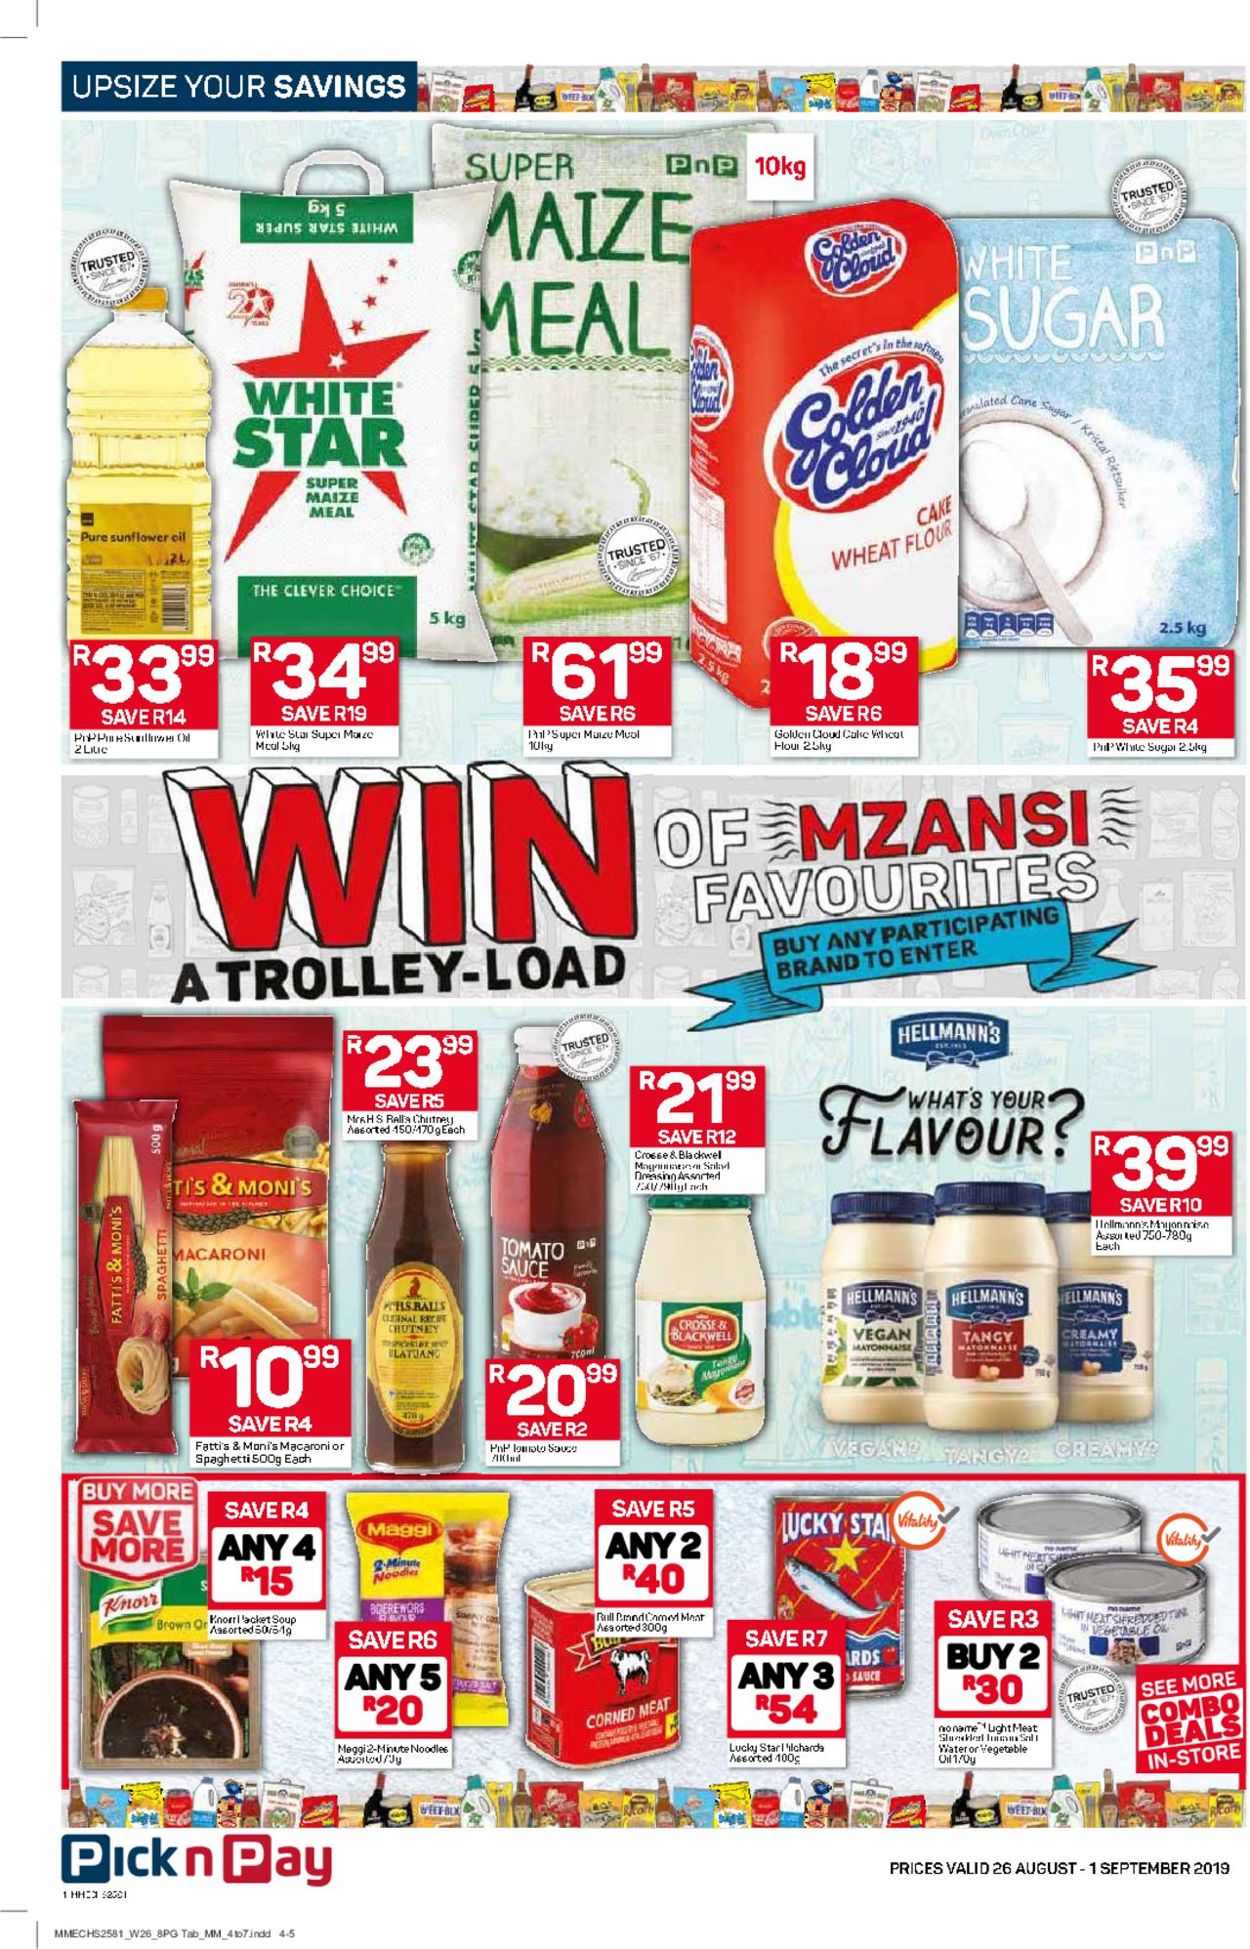 Pick n Pay Catalogue - 2019/08/26-2019/09/01 (Page 4)